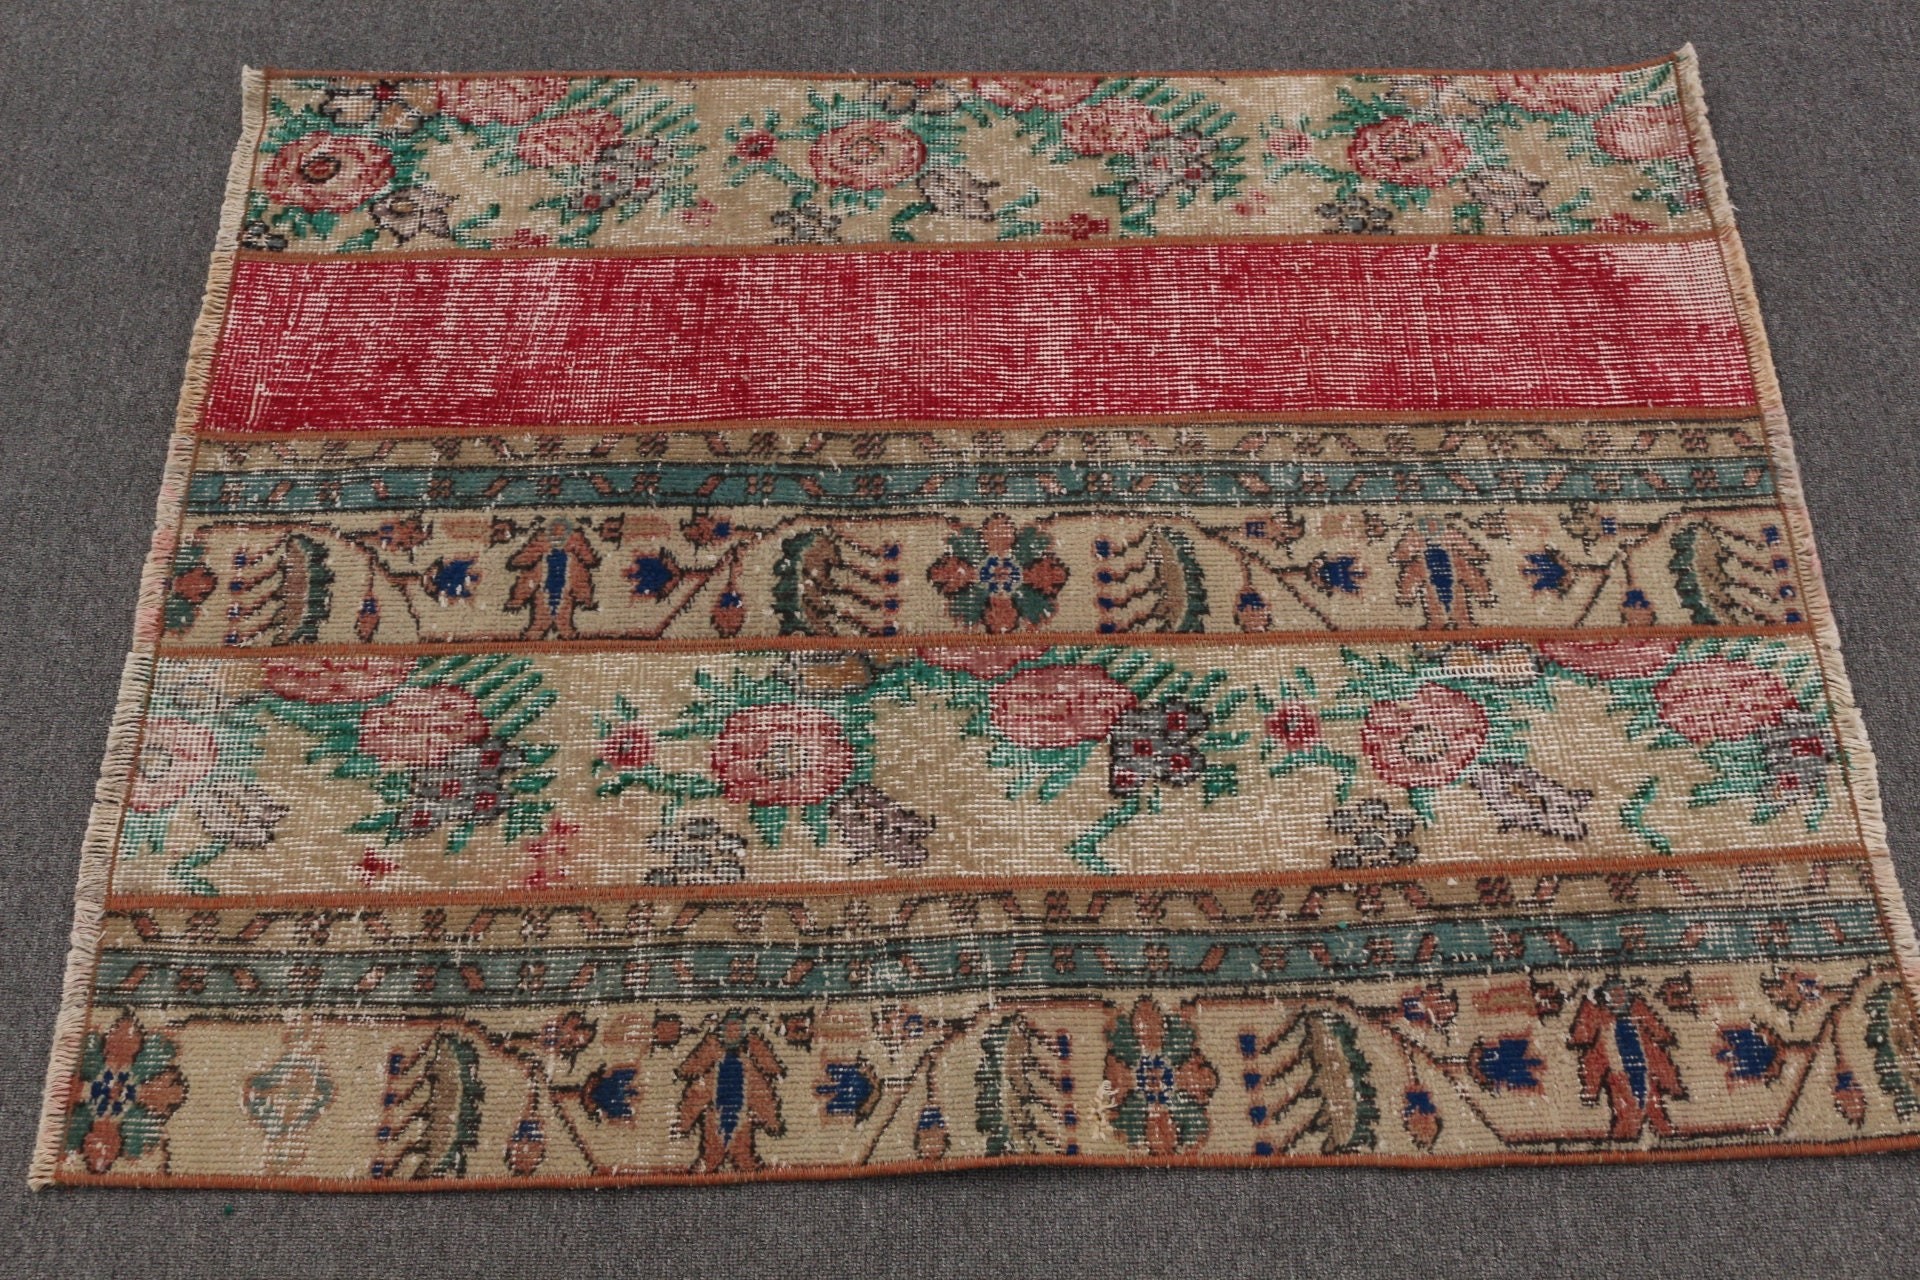 Rugs for Entry, 3x3.8 ft Small Rug, Door Mat Rug, Entry Rug, Brown Oushak Rugs, Vintage Rug, Turkish Rug, Home Decor Rug, Antique Rugs